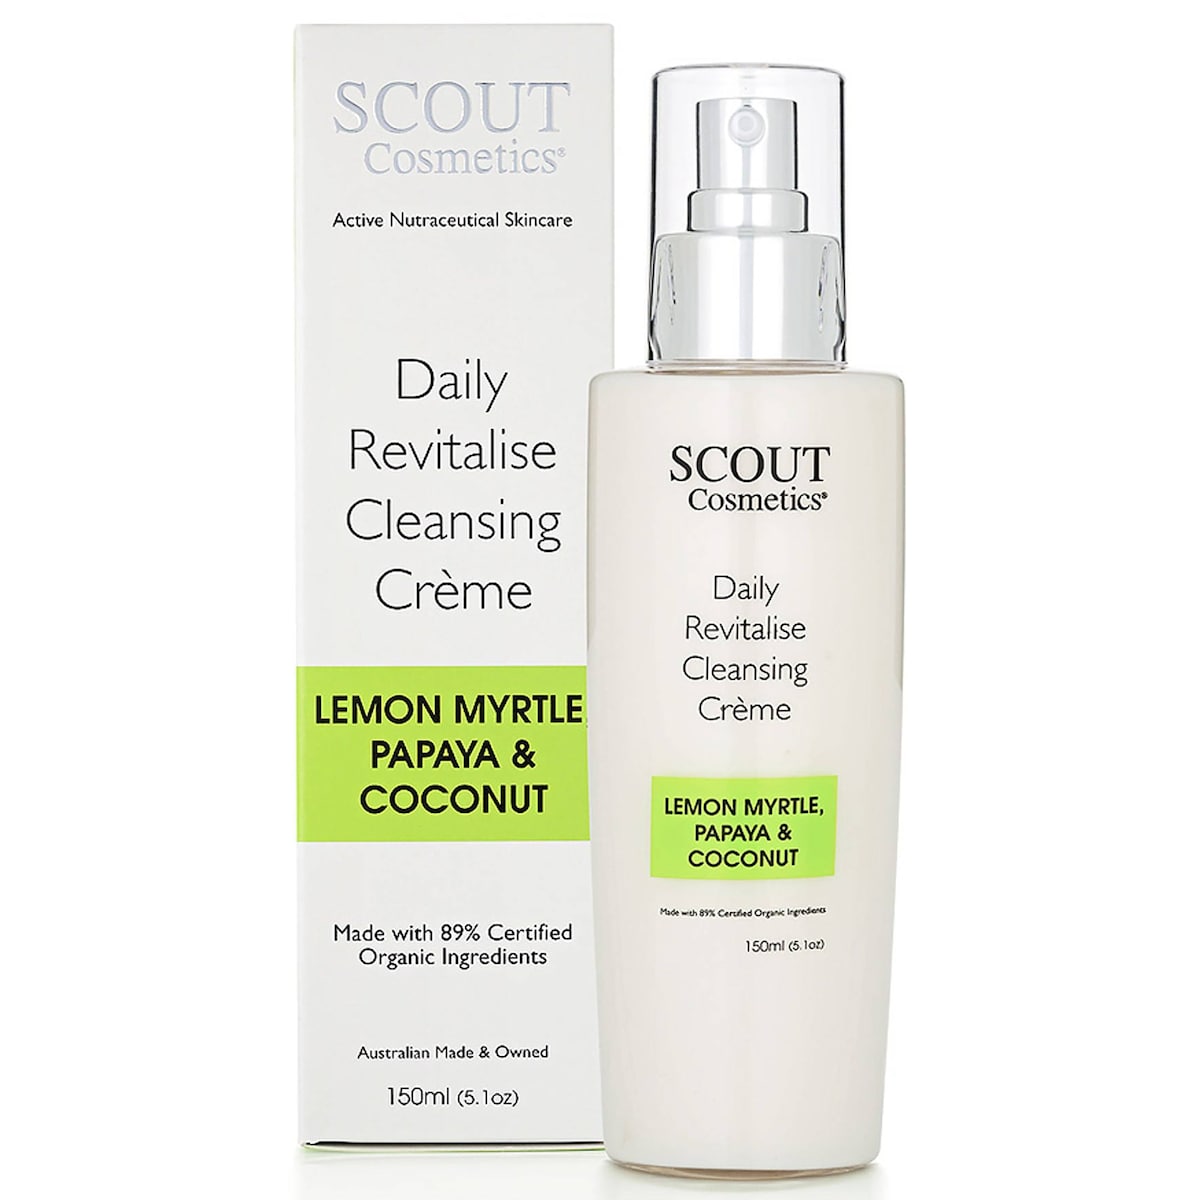 Scout Daily Revitalise Cleansing Creme 150ml